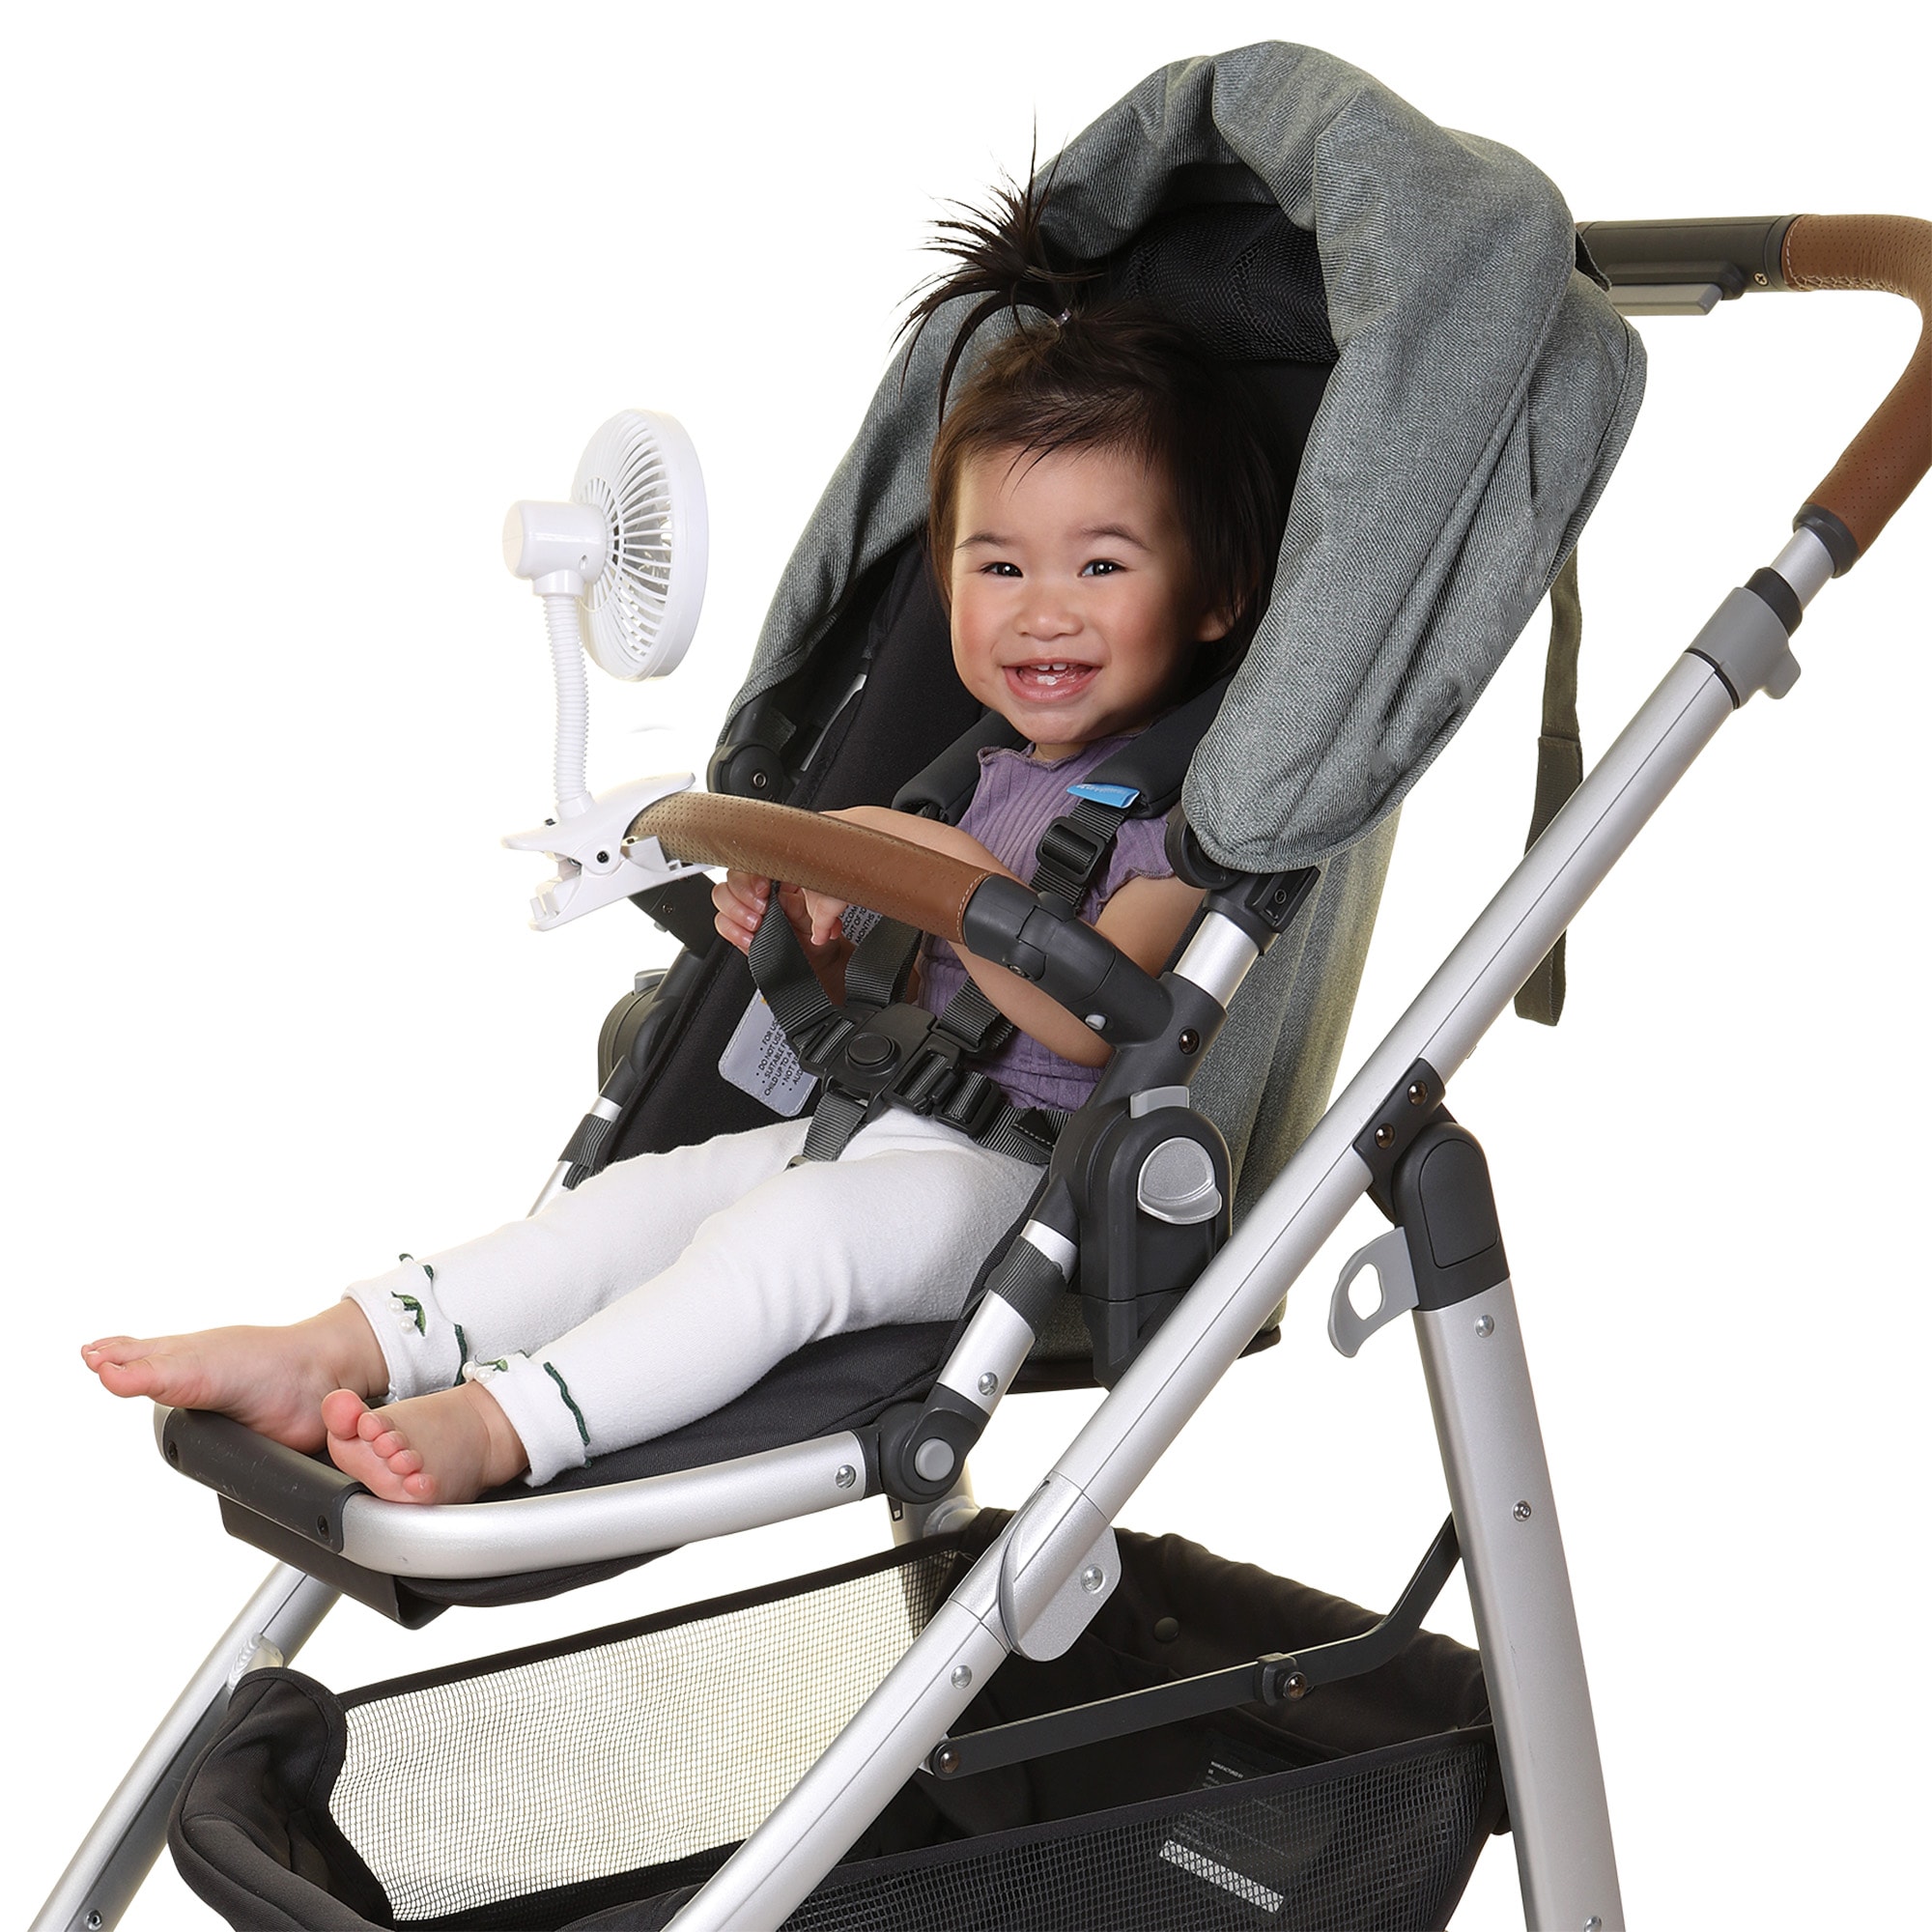 Dreambaby White Plastic Stroller Fan with Safety Guard, Clip-On